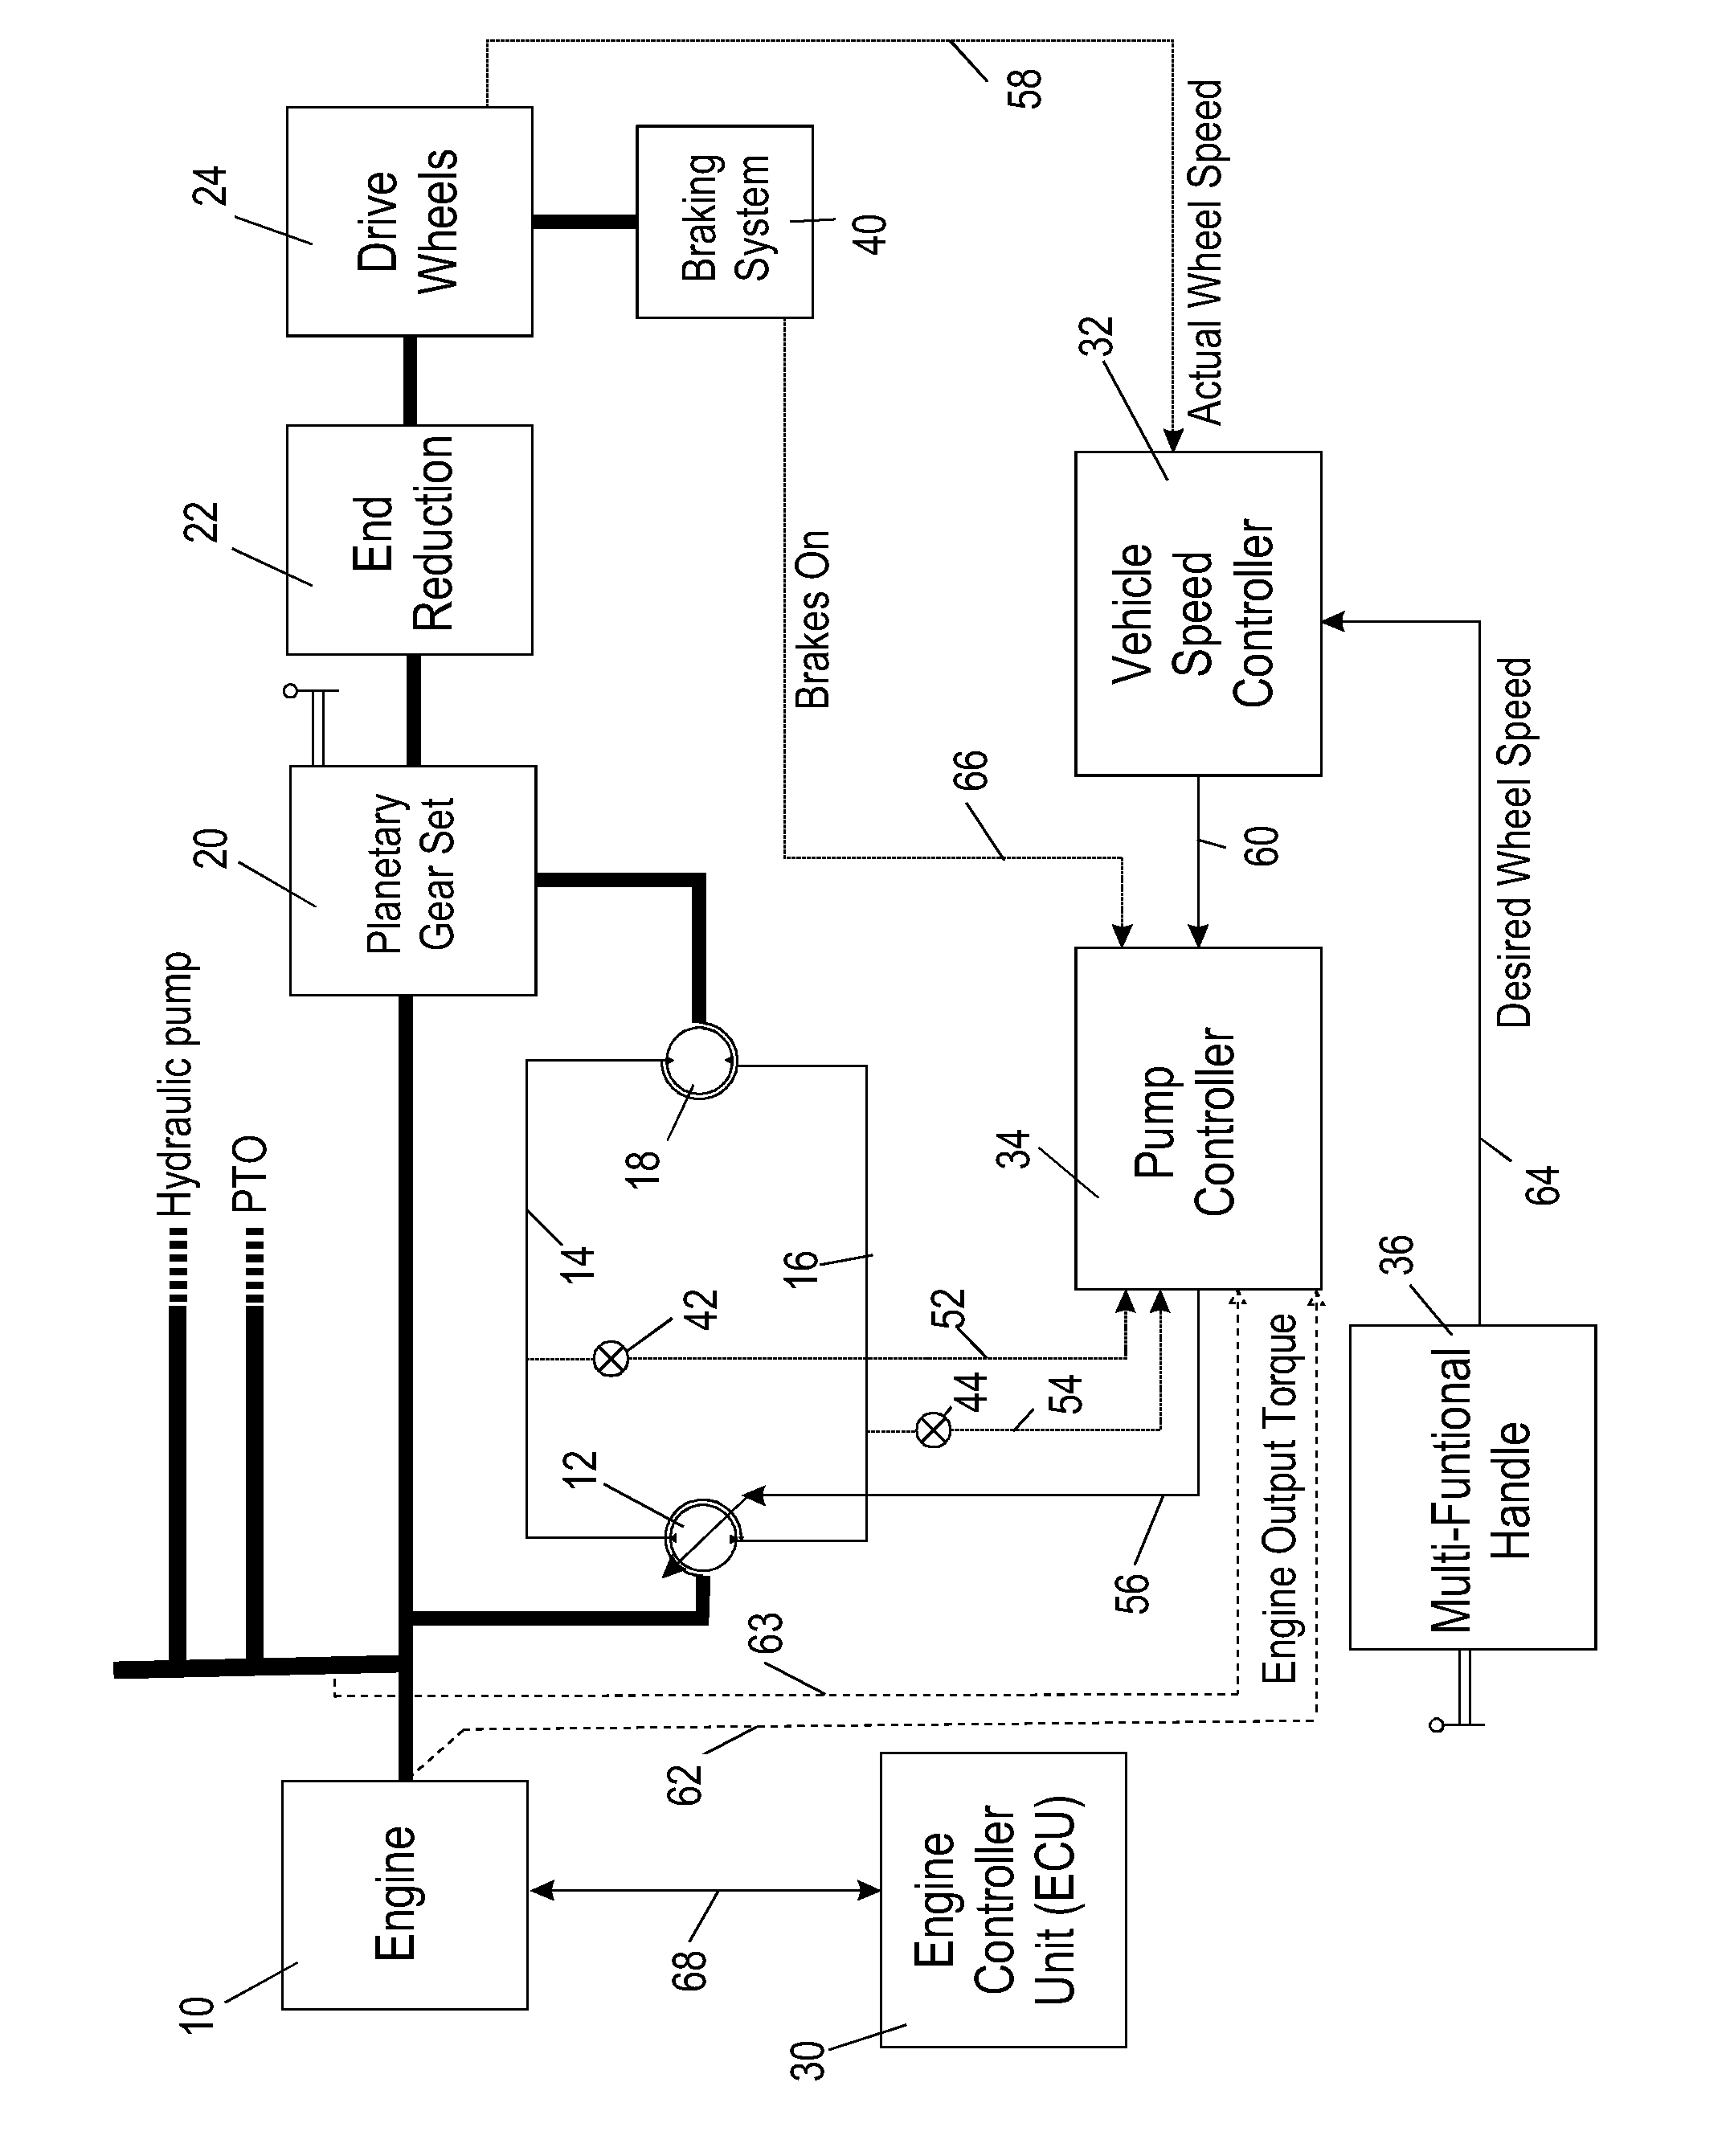 Agricultural vehicle with a continuously variable transmission